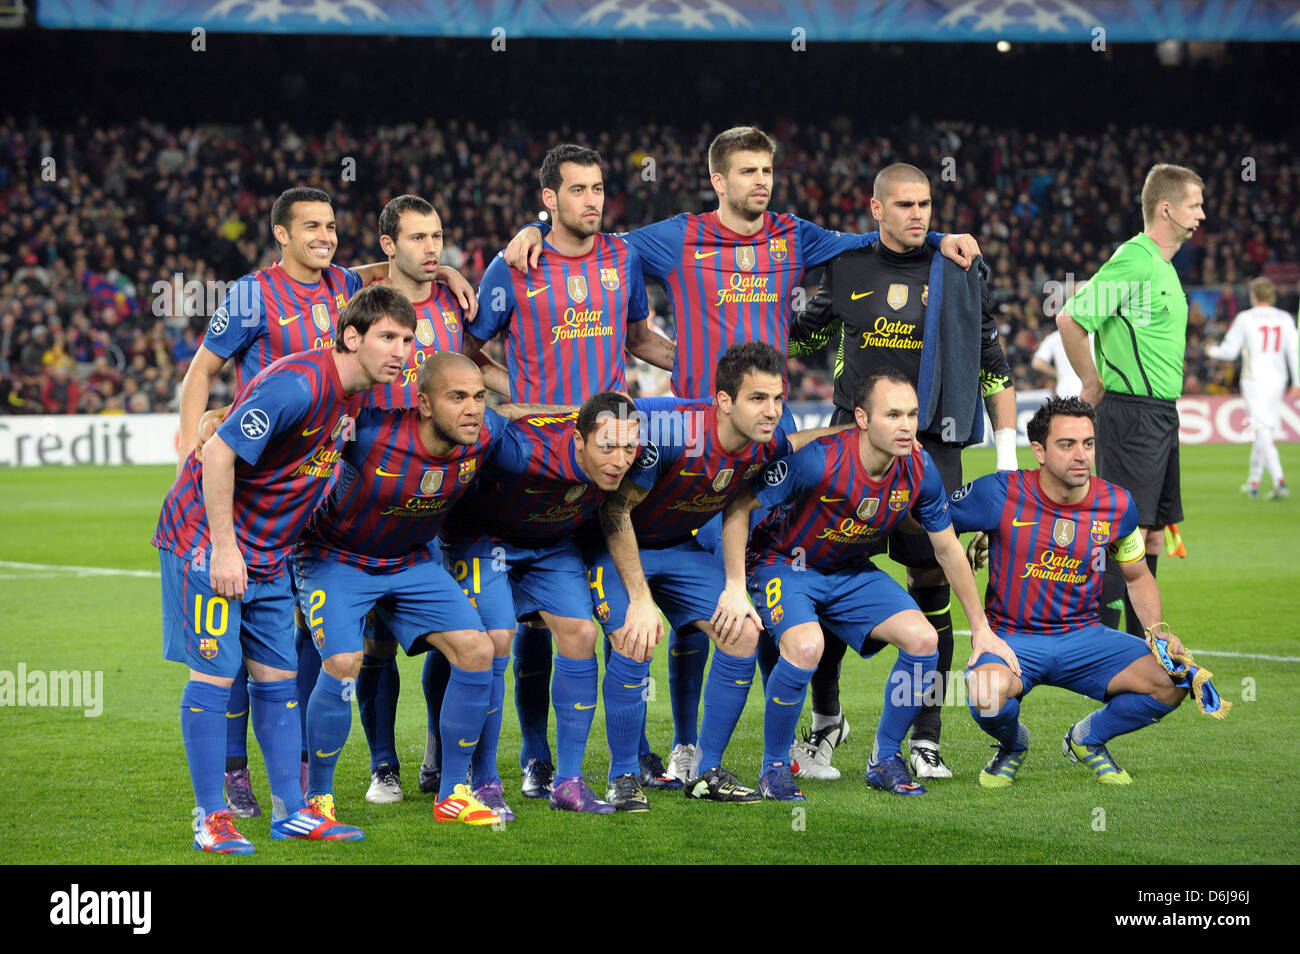 Barcelona's team poses for a team photo prior to the Champions League round of sixteen second leg soccer match between FC Barcelona and Bayer Leverkusen at the Nou Camp stadium in Barcelona, north-eastern Spain, 07 March 2012. Back (L-R): Alexis Sanchez, Javier Mascherano, Sergio Busquets, Xavi Alonso and goalkeeper Víctor Valdes. Front (L-R): Lionel Messi, Dani Alves, Adriano, Ces Stock Photo